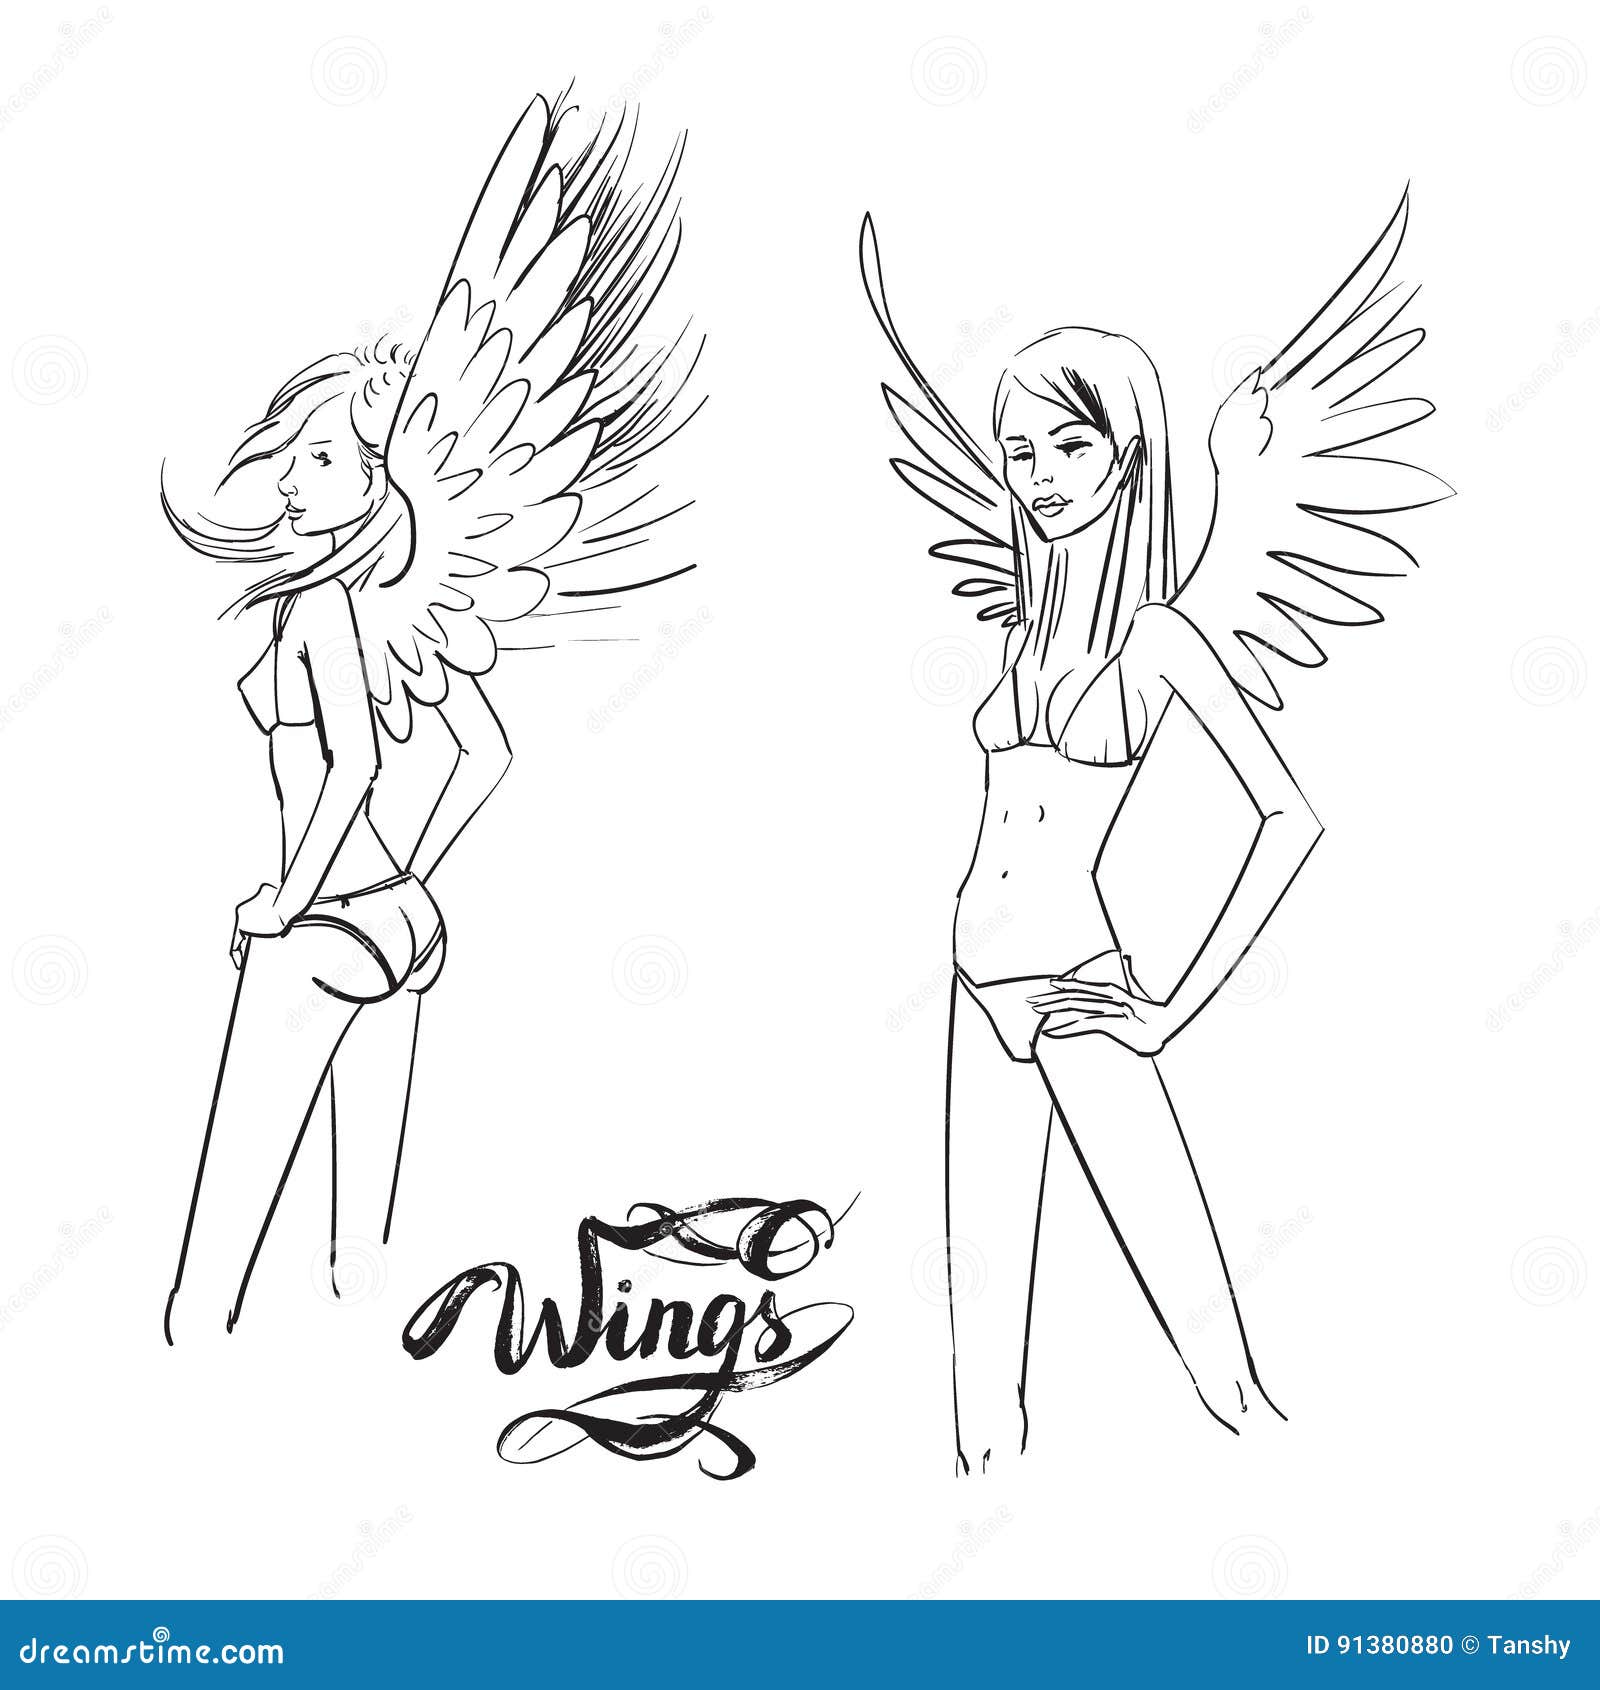 How to draw a girl with angel wings | How to draw angel wings | Drawing girl  | Angel sketch drawing - YouTube